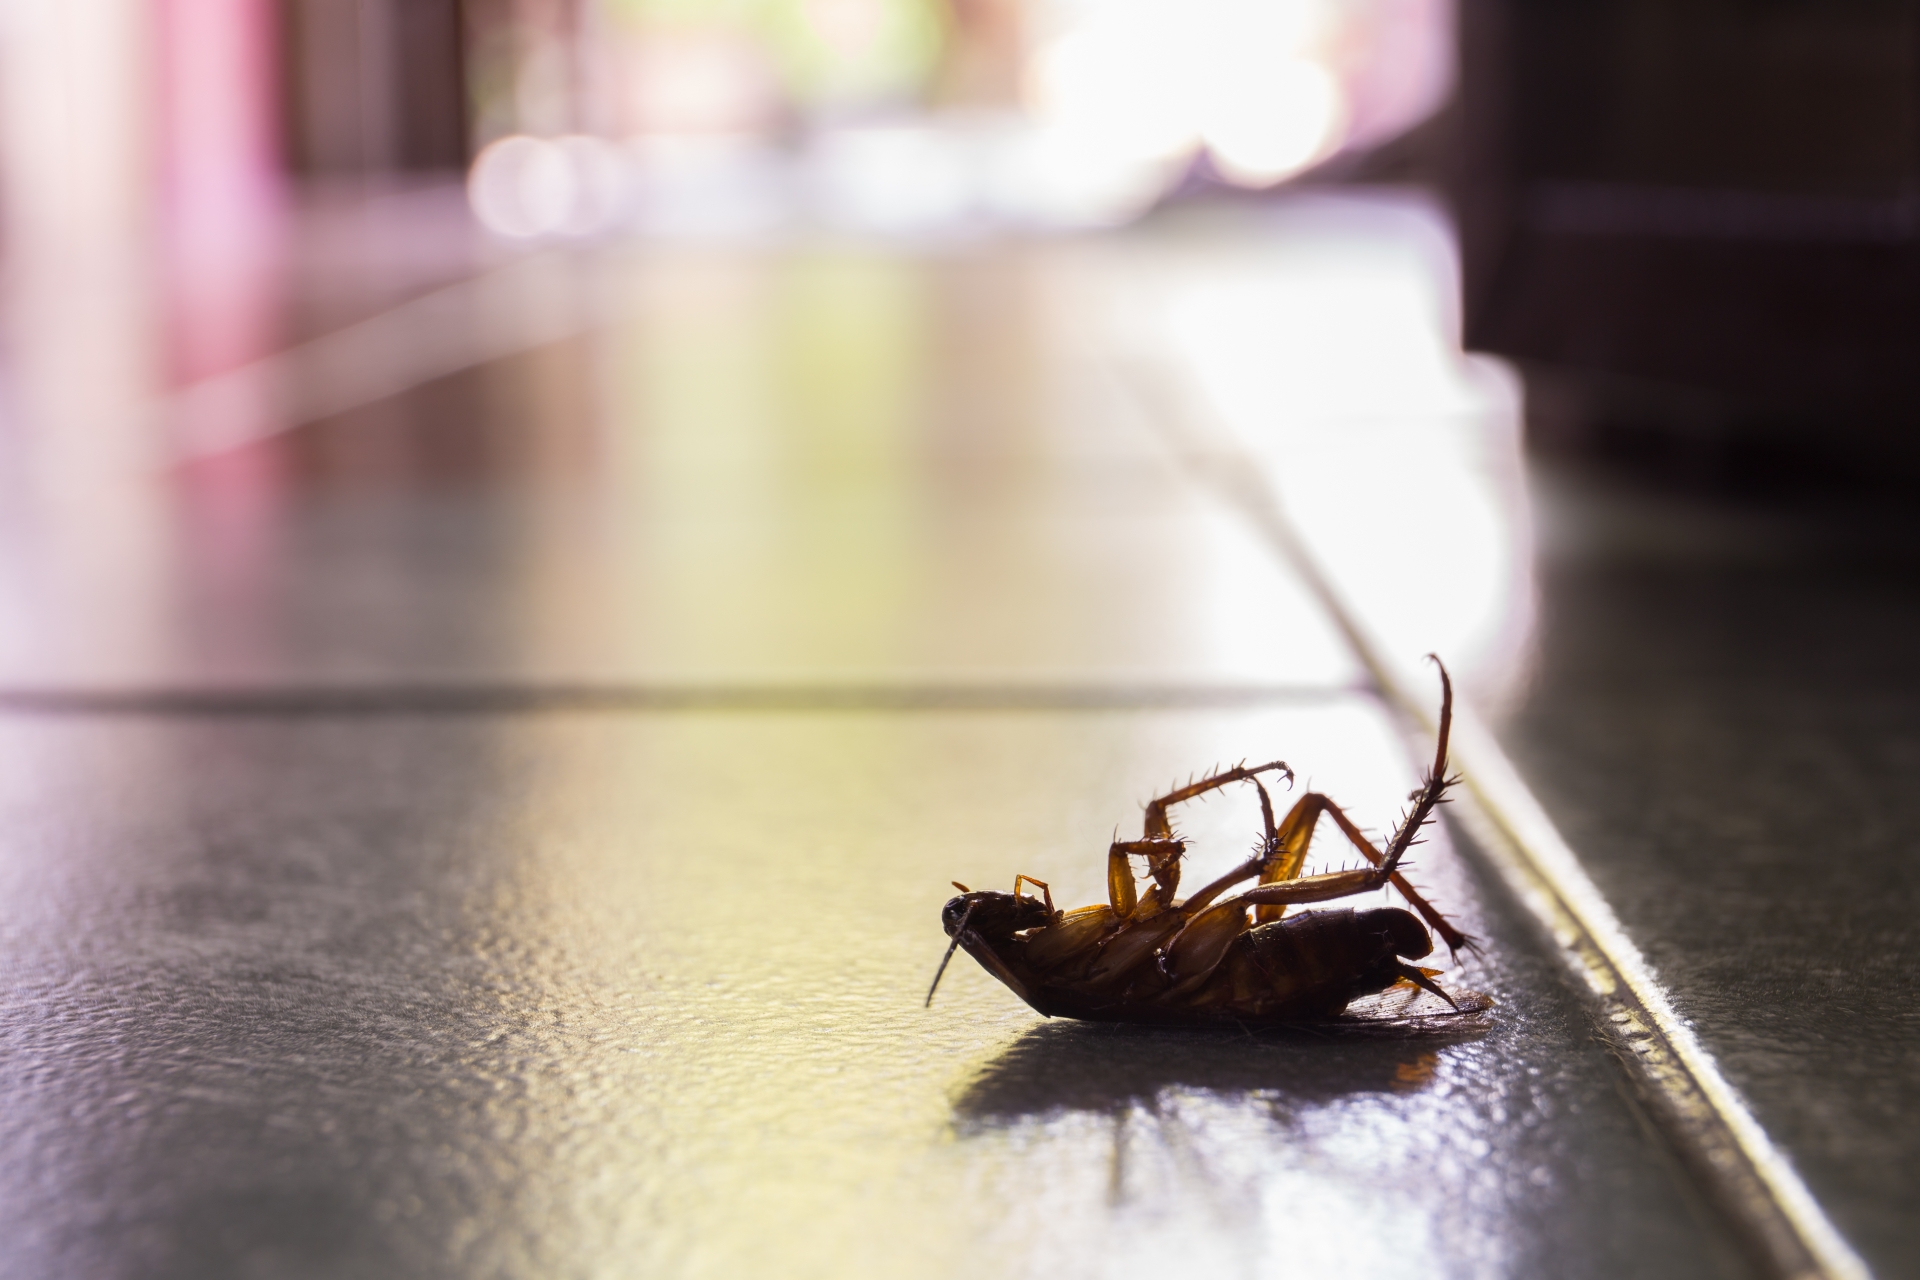 Cockroach Control, Pest Control in Shoreditch, E2. Call Now 020 8166 9746